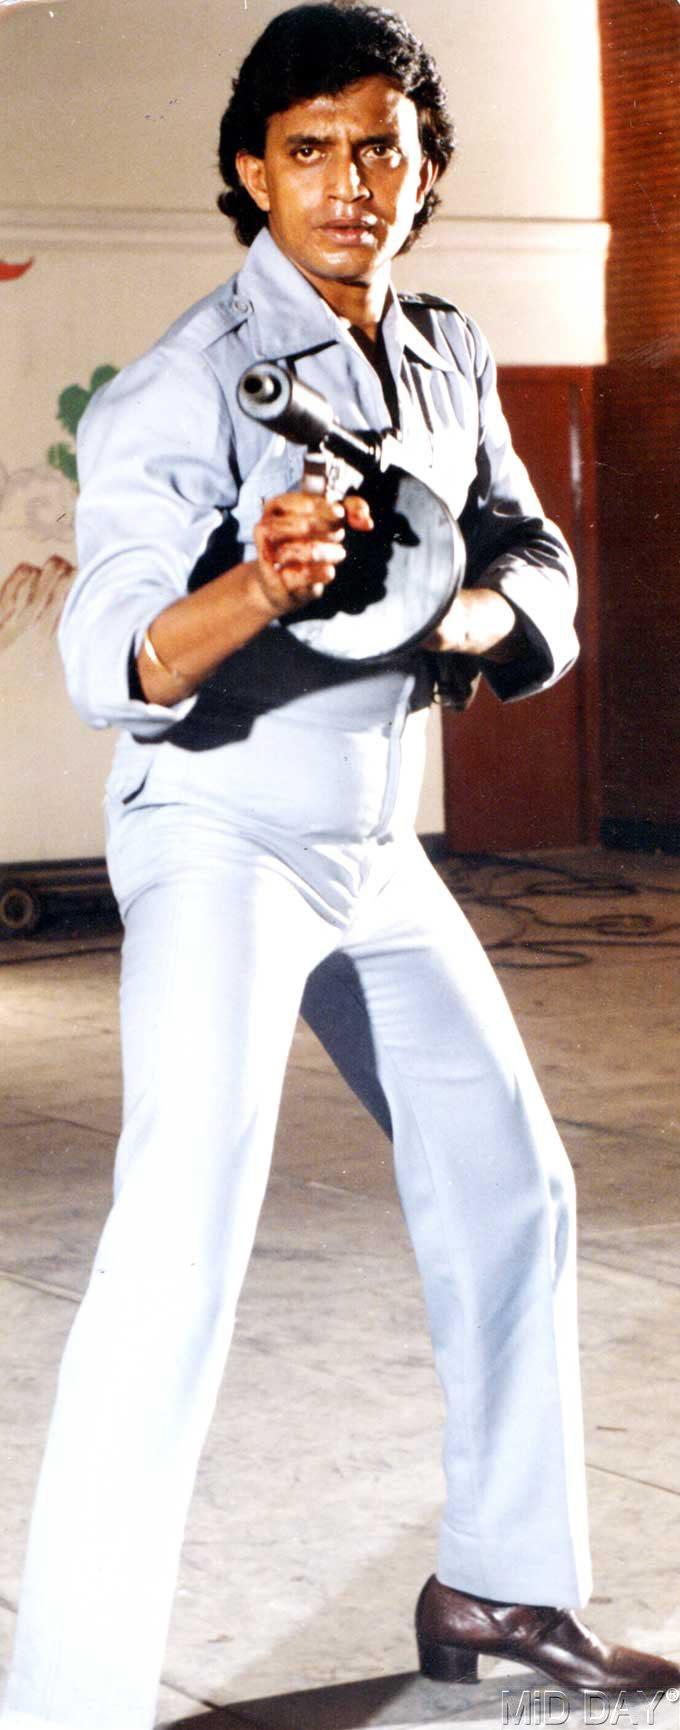 Known majorly for his action movies and his patent dance moves, in real life, Mithun Chakraborty has taken training in Martial Arts to the grade of black belt